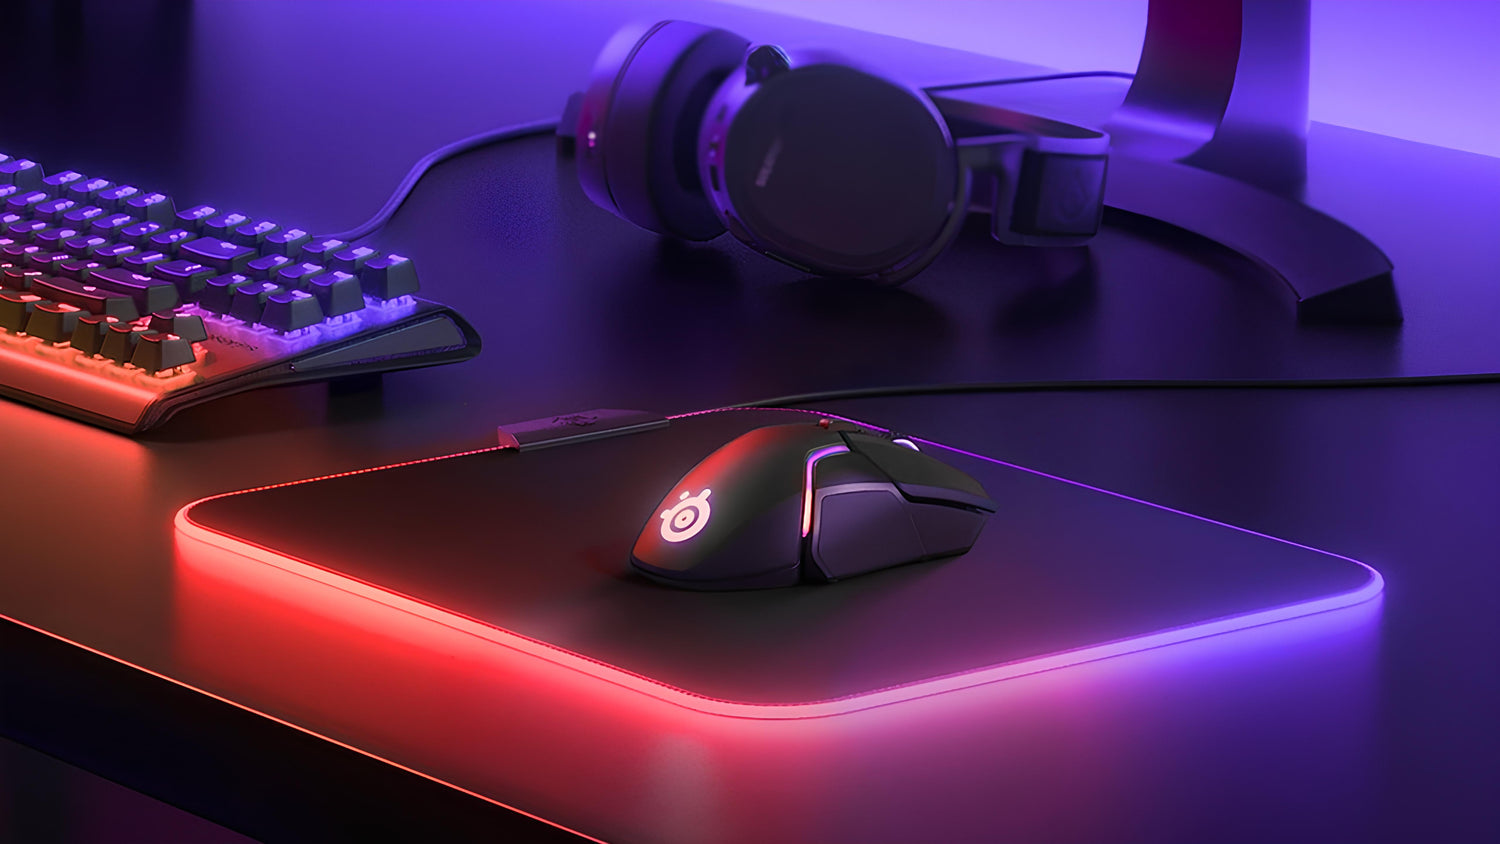 MOUSE + MOUSE PAD